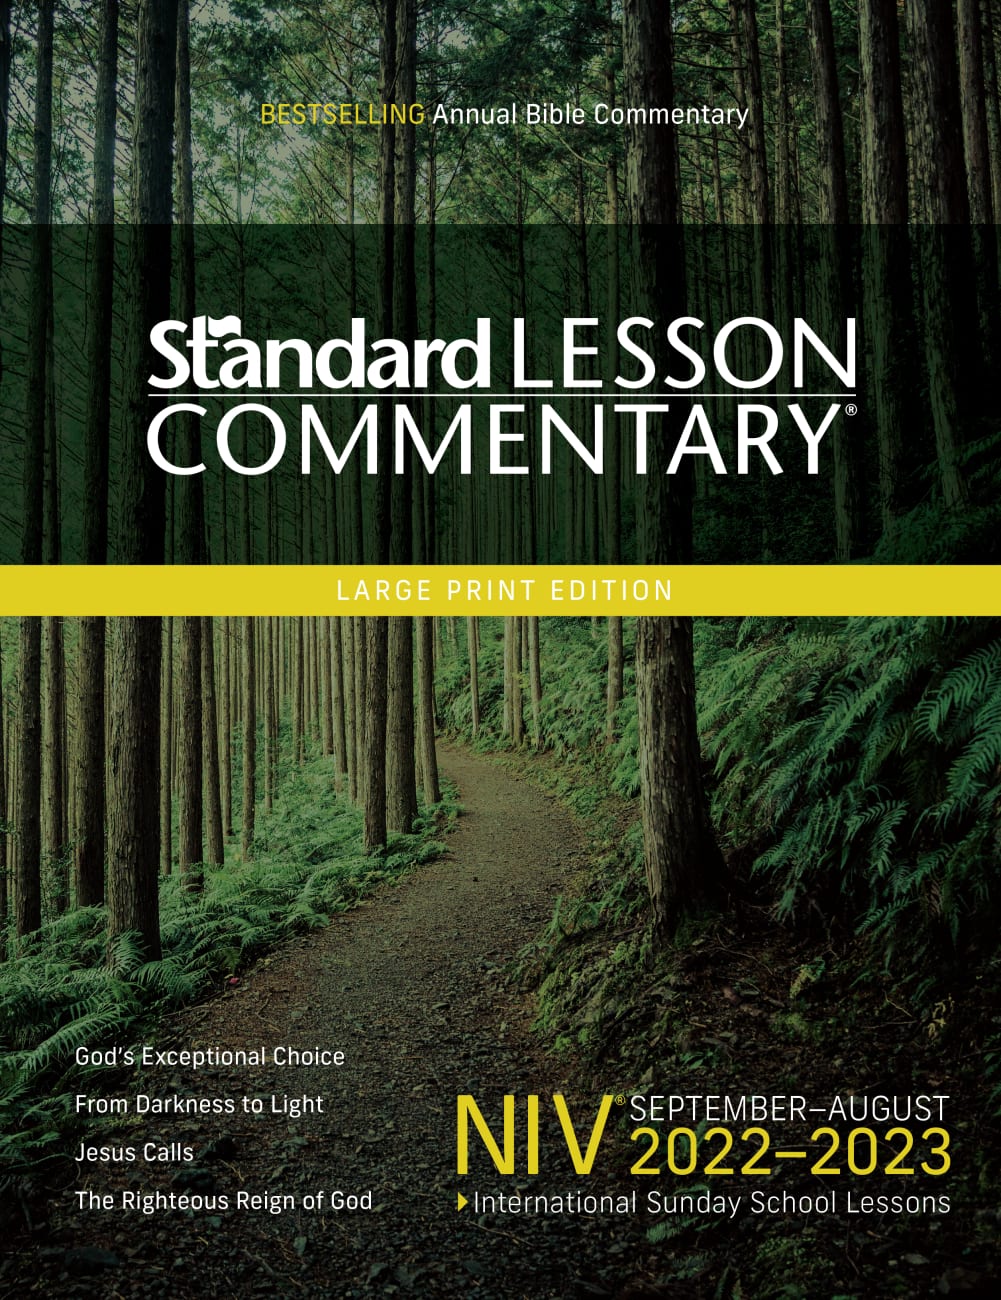 NIV Standard Lesson Commentary Large Print Edition 2022-2023 Paperback